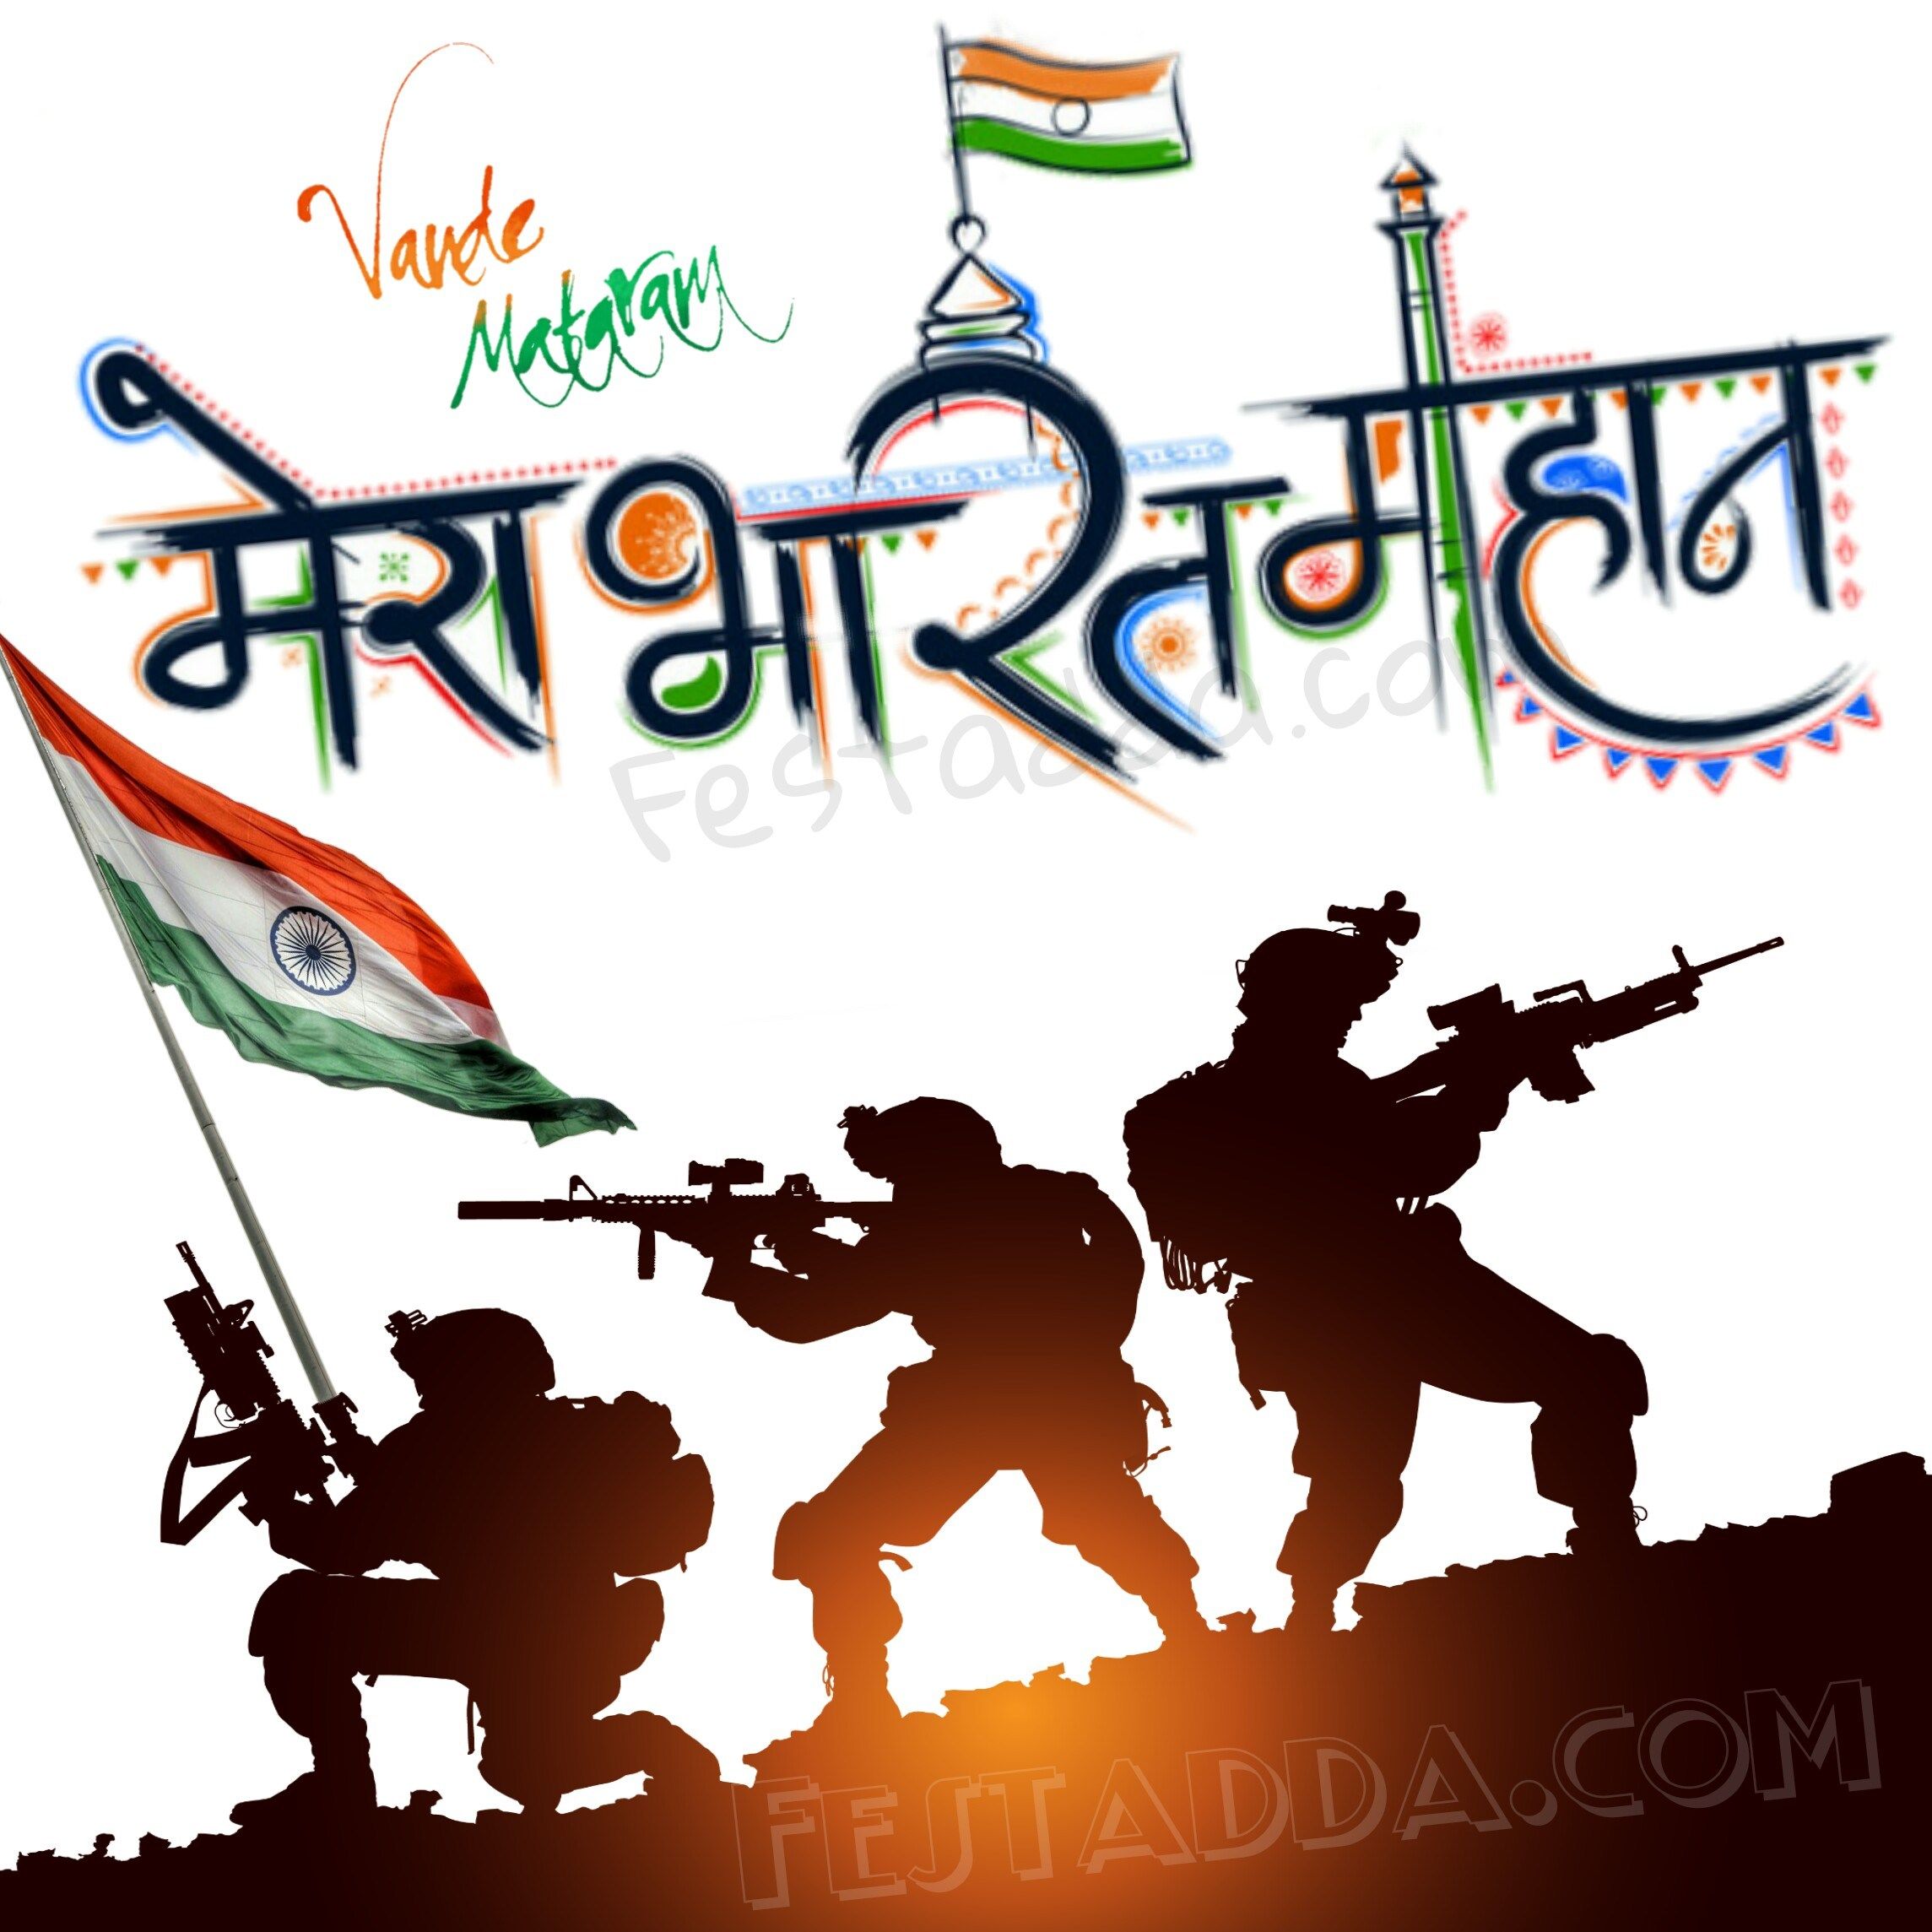 26th January Pics Image Photos. Indian Flag Wallpaper, Indian Army Wallpaper, Army Image